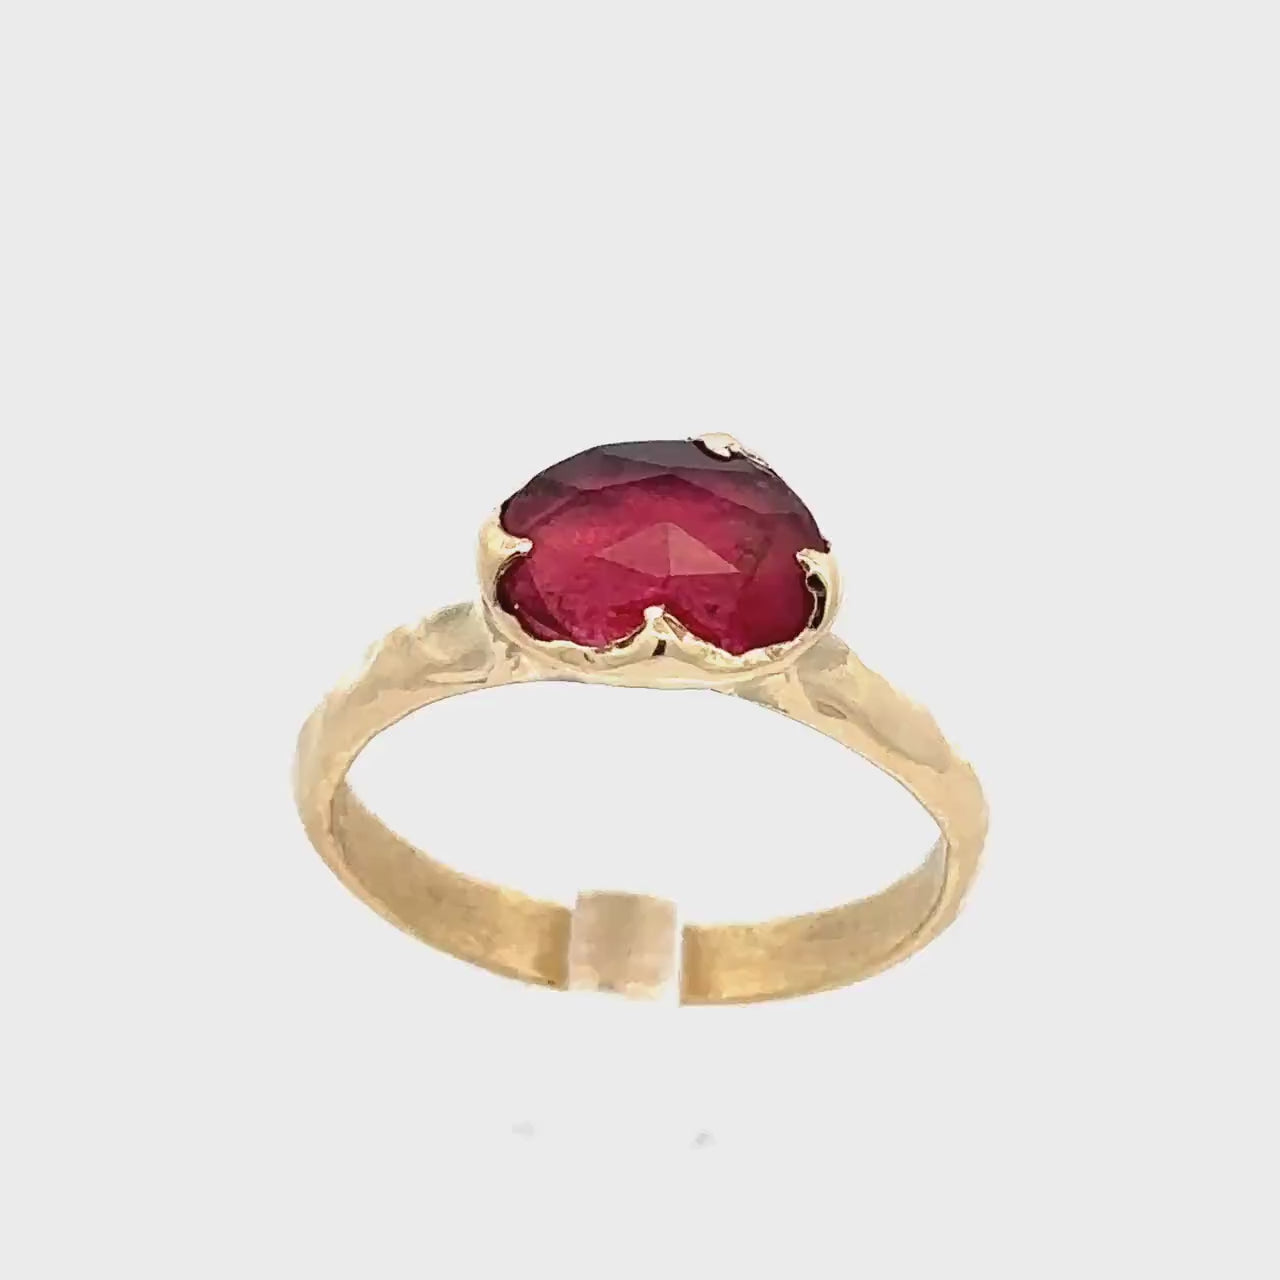 Fancy cut pink Tourmaline Gold Ring Gemstone Solitaire recycled 14k yellow gold statement 3316